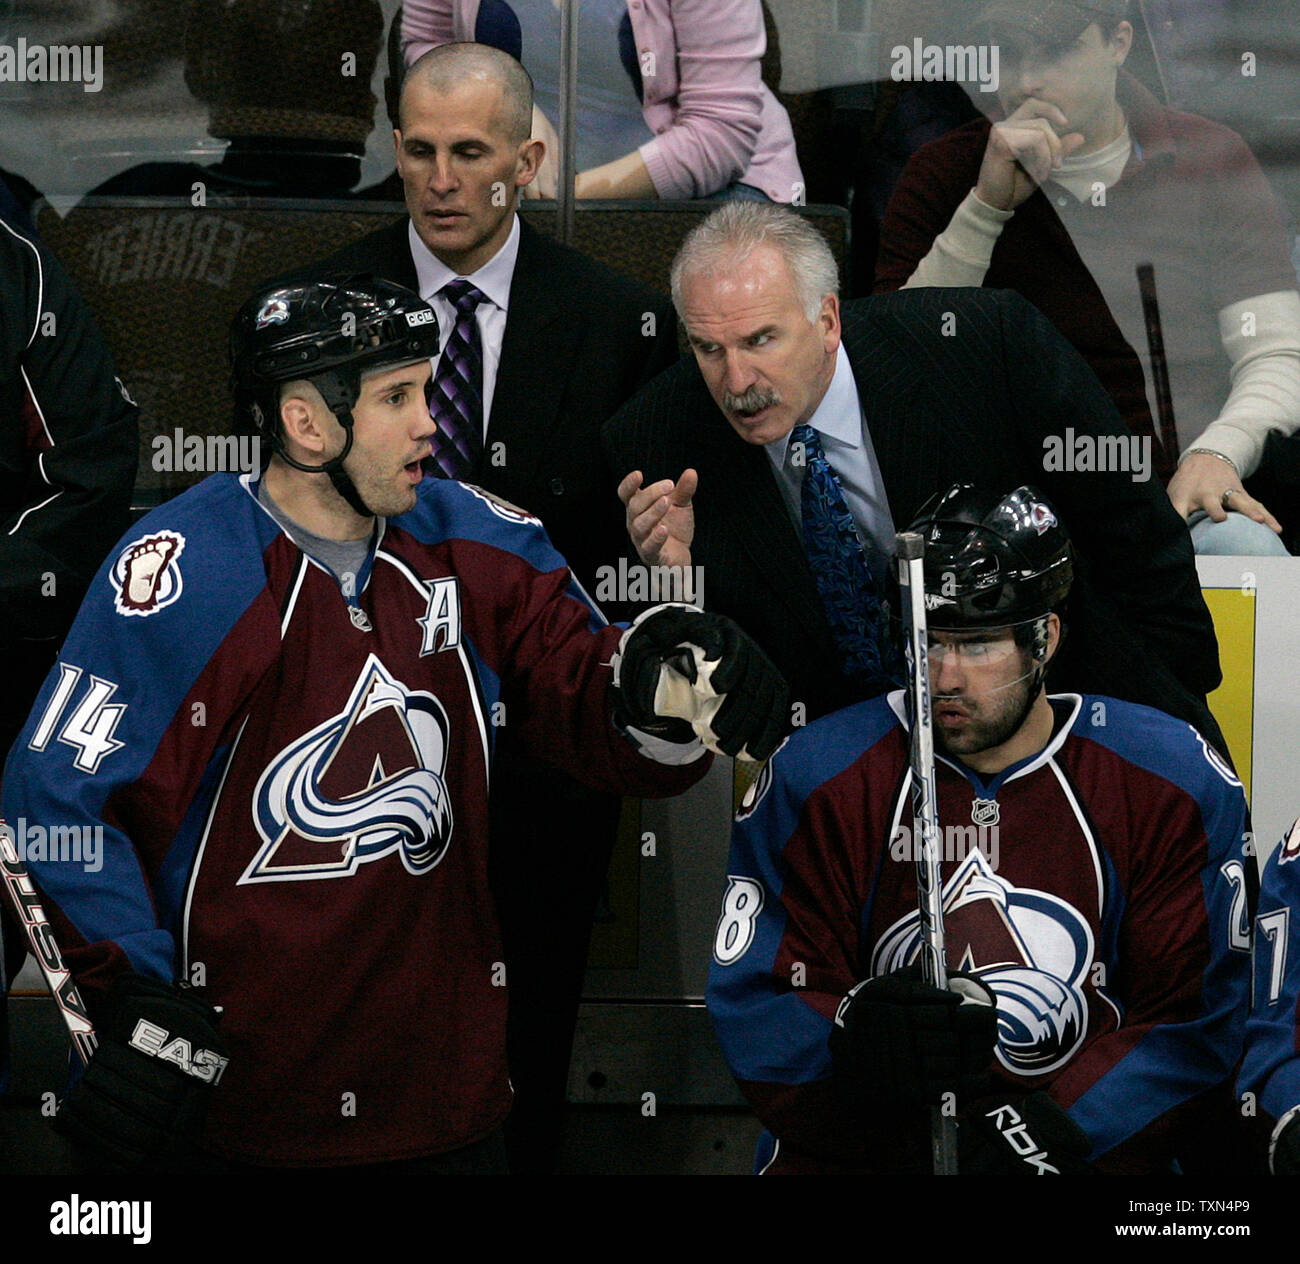 Colorado Avalanche head coach Joel Quenneville (top right) gestures toward Avalanche right wing Ian Laperriere (14) during the first period at the Pepsi Center in Denver on March 14, 2008.  Colorado leads the Northwest division while New Jersey, the Atlantic division leader, sits atop the Eastern Conference standings.  (UPI Photo/Gary C. Caskey) Stock Photo